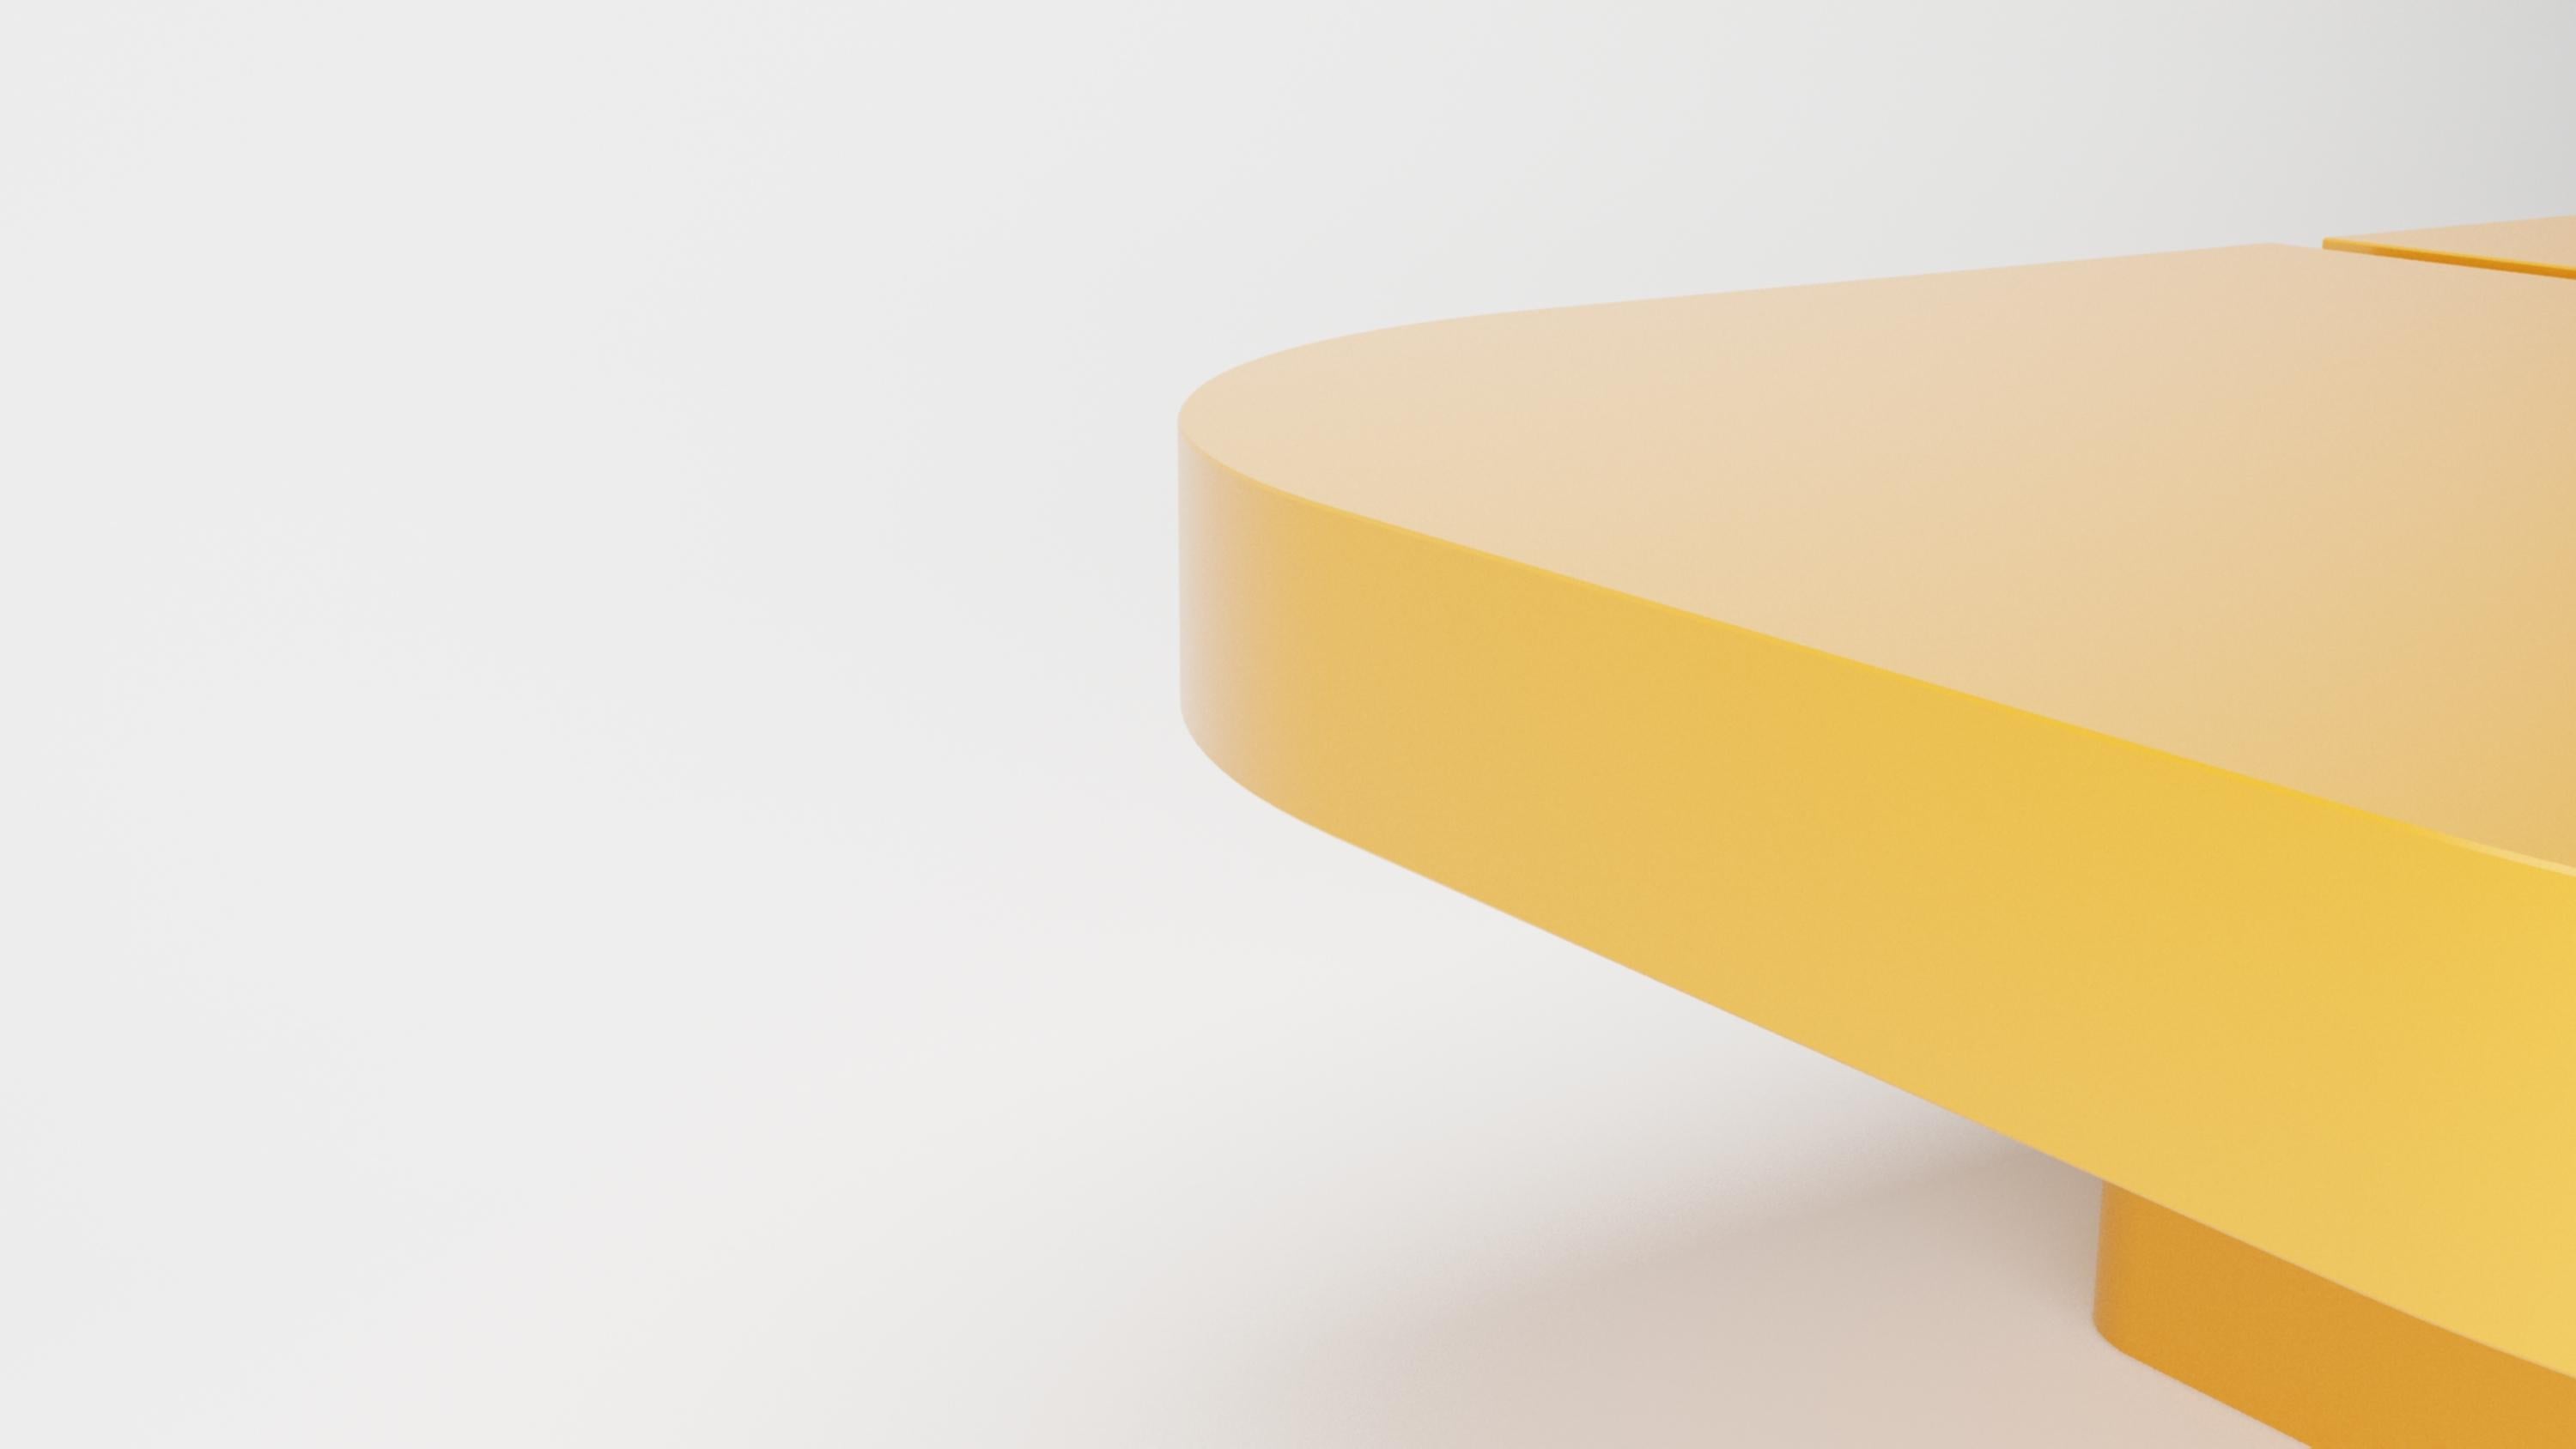 Collector - Designed by Studio Rig MecoCenter Table lacquered Ral 1005

Collector brand was born and Portugal and aims to be part of daily life by fusing furniture to home routines and lifestyles. The company designs its pieces with the intention to